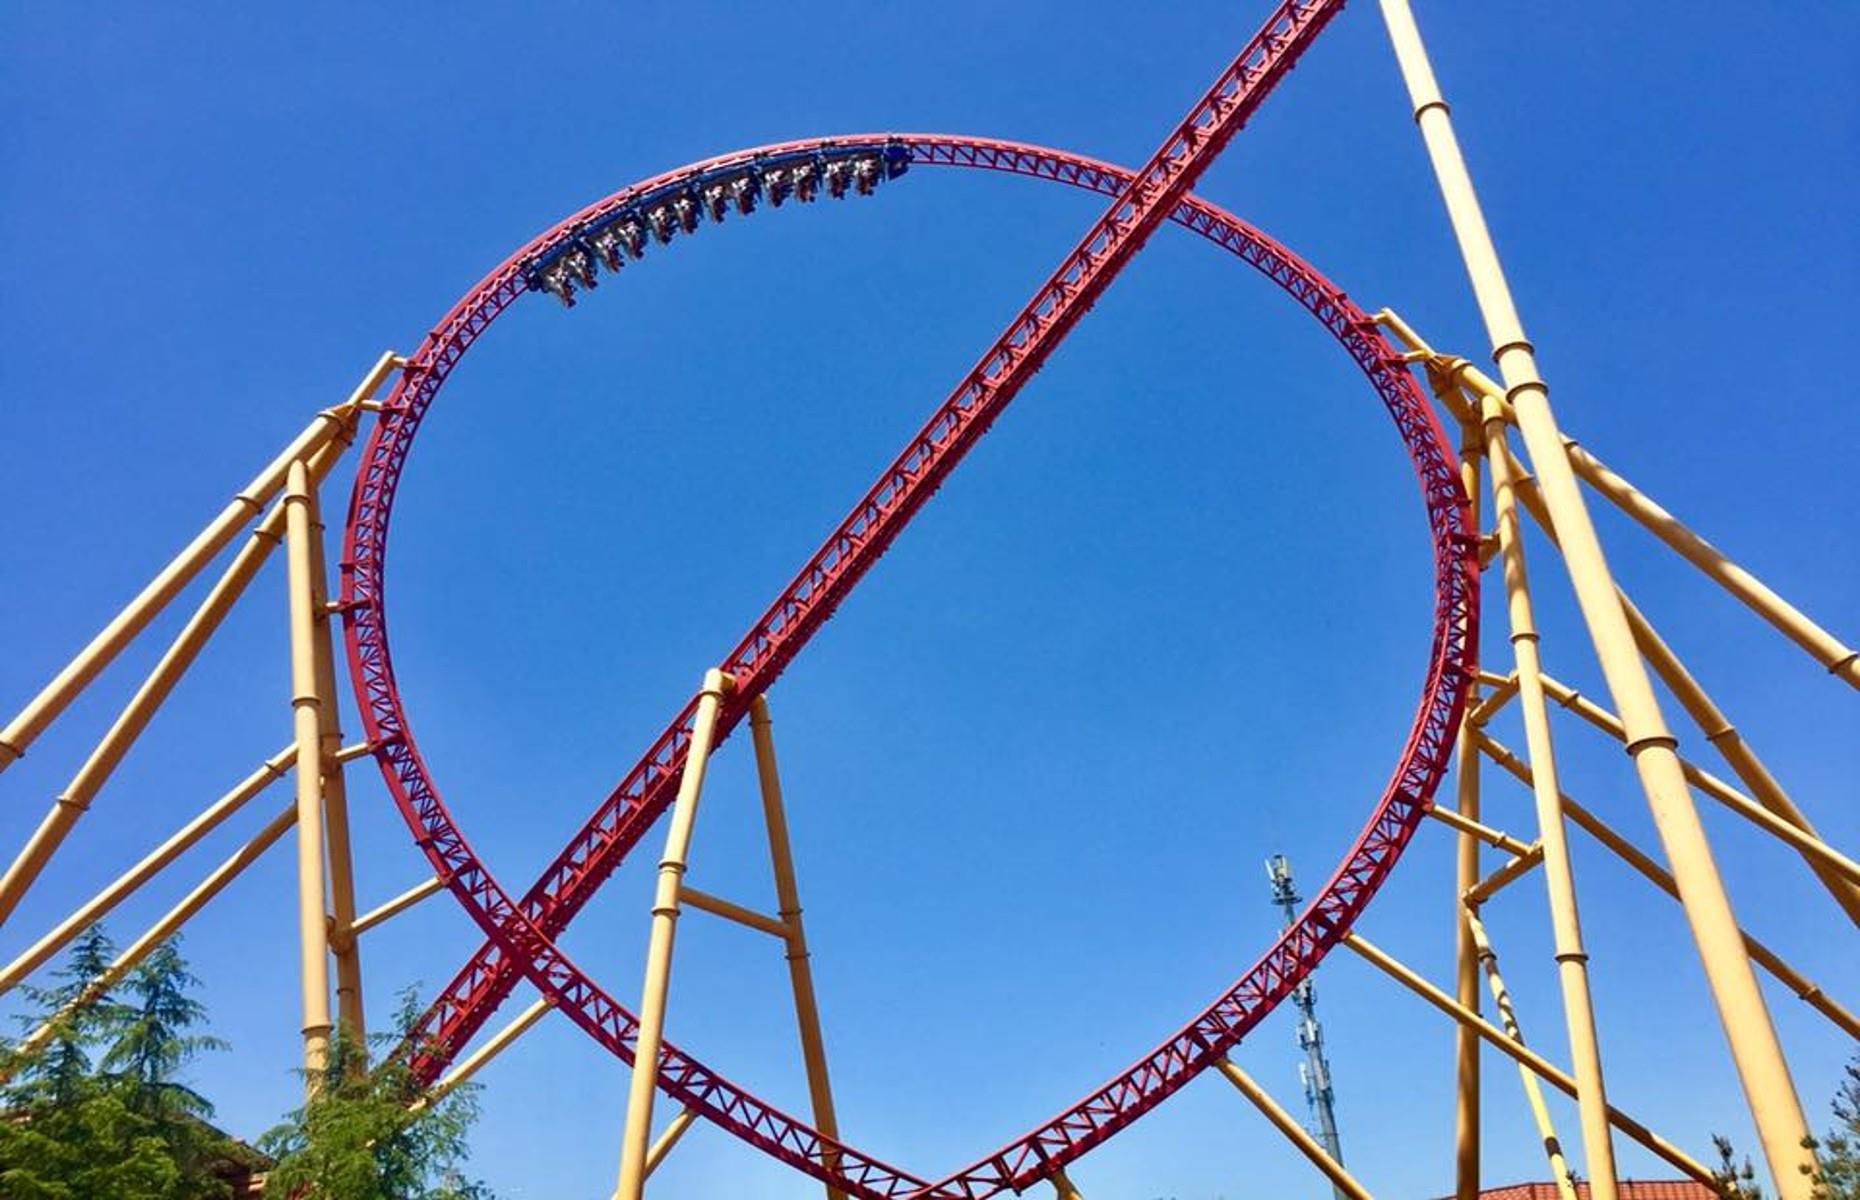 <p>This eight-year-old ride shares the record for the world's largest inversion loop (with Hyper Coaster in Turkey) at 139 feet. The unique loop wraps around another part of the track, which also features a chain lift hill and zero-G roll. </p>  <p>Flash is set in China’s biggest amusement park, Lewa Adventure.</p>